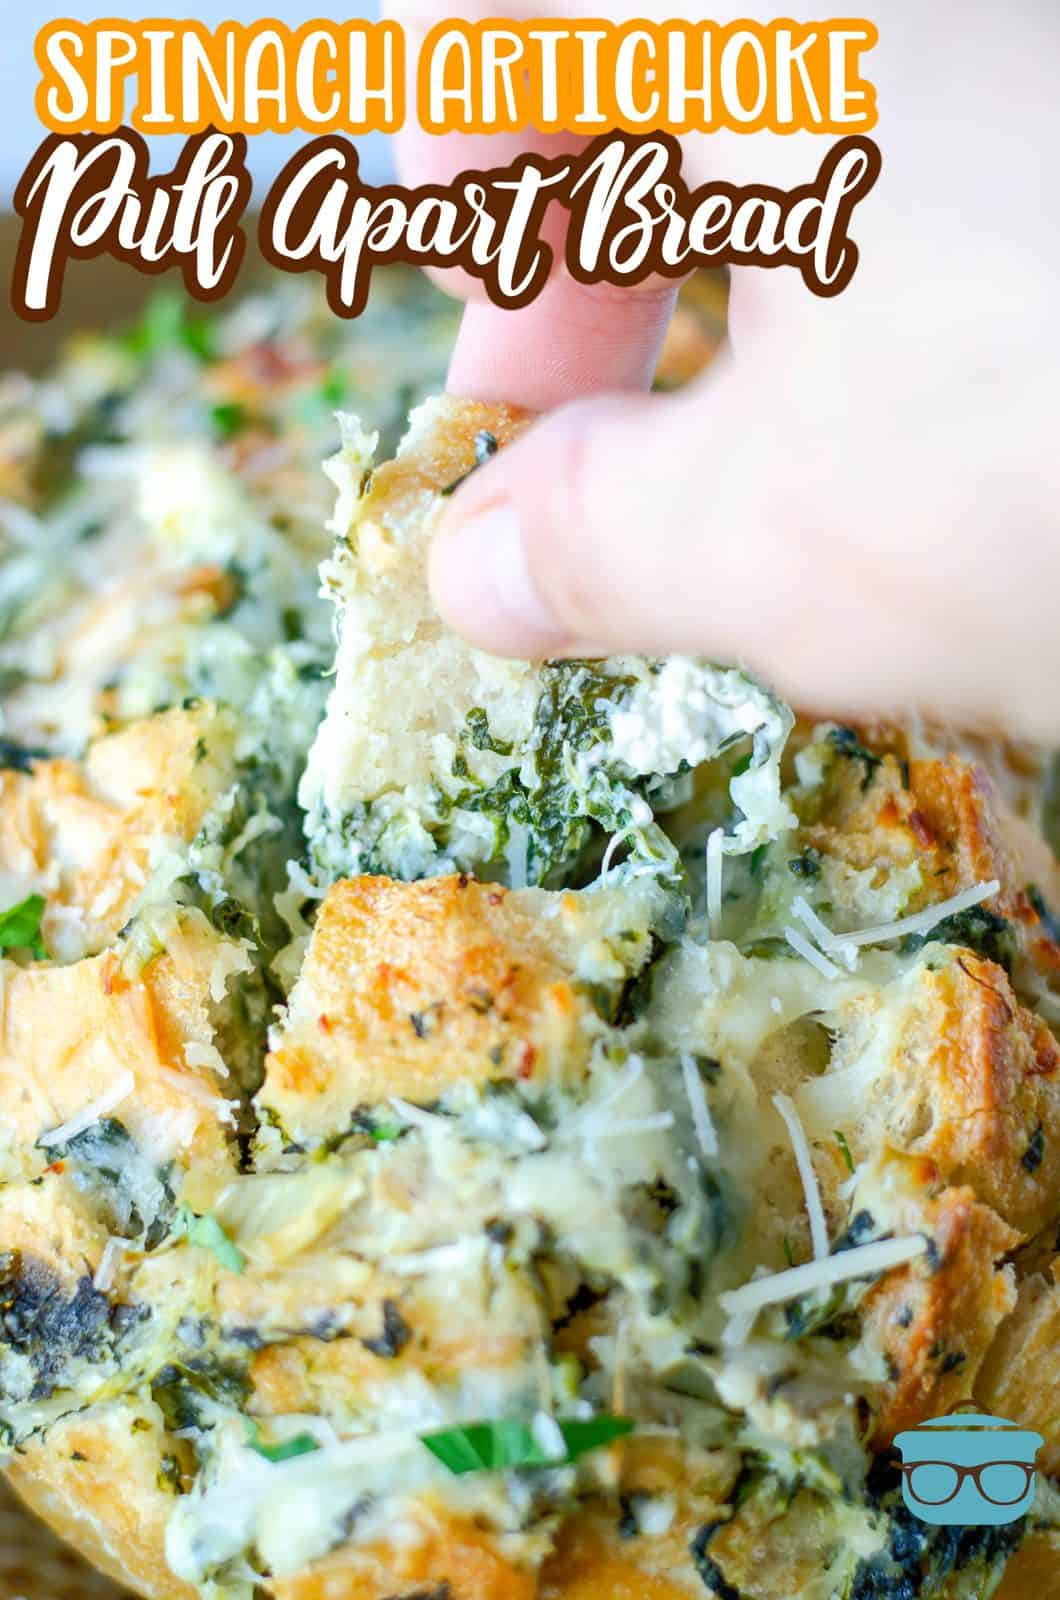 Pinterest image of hand pulling apart some of the Spinach Artichoke Pull-Apart Bread.